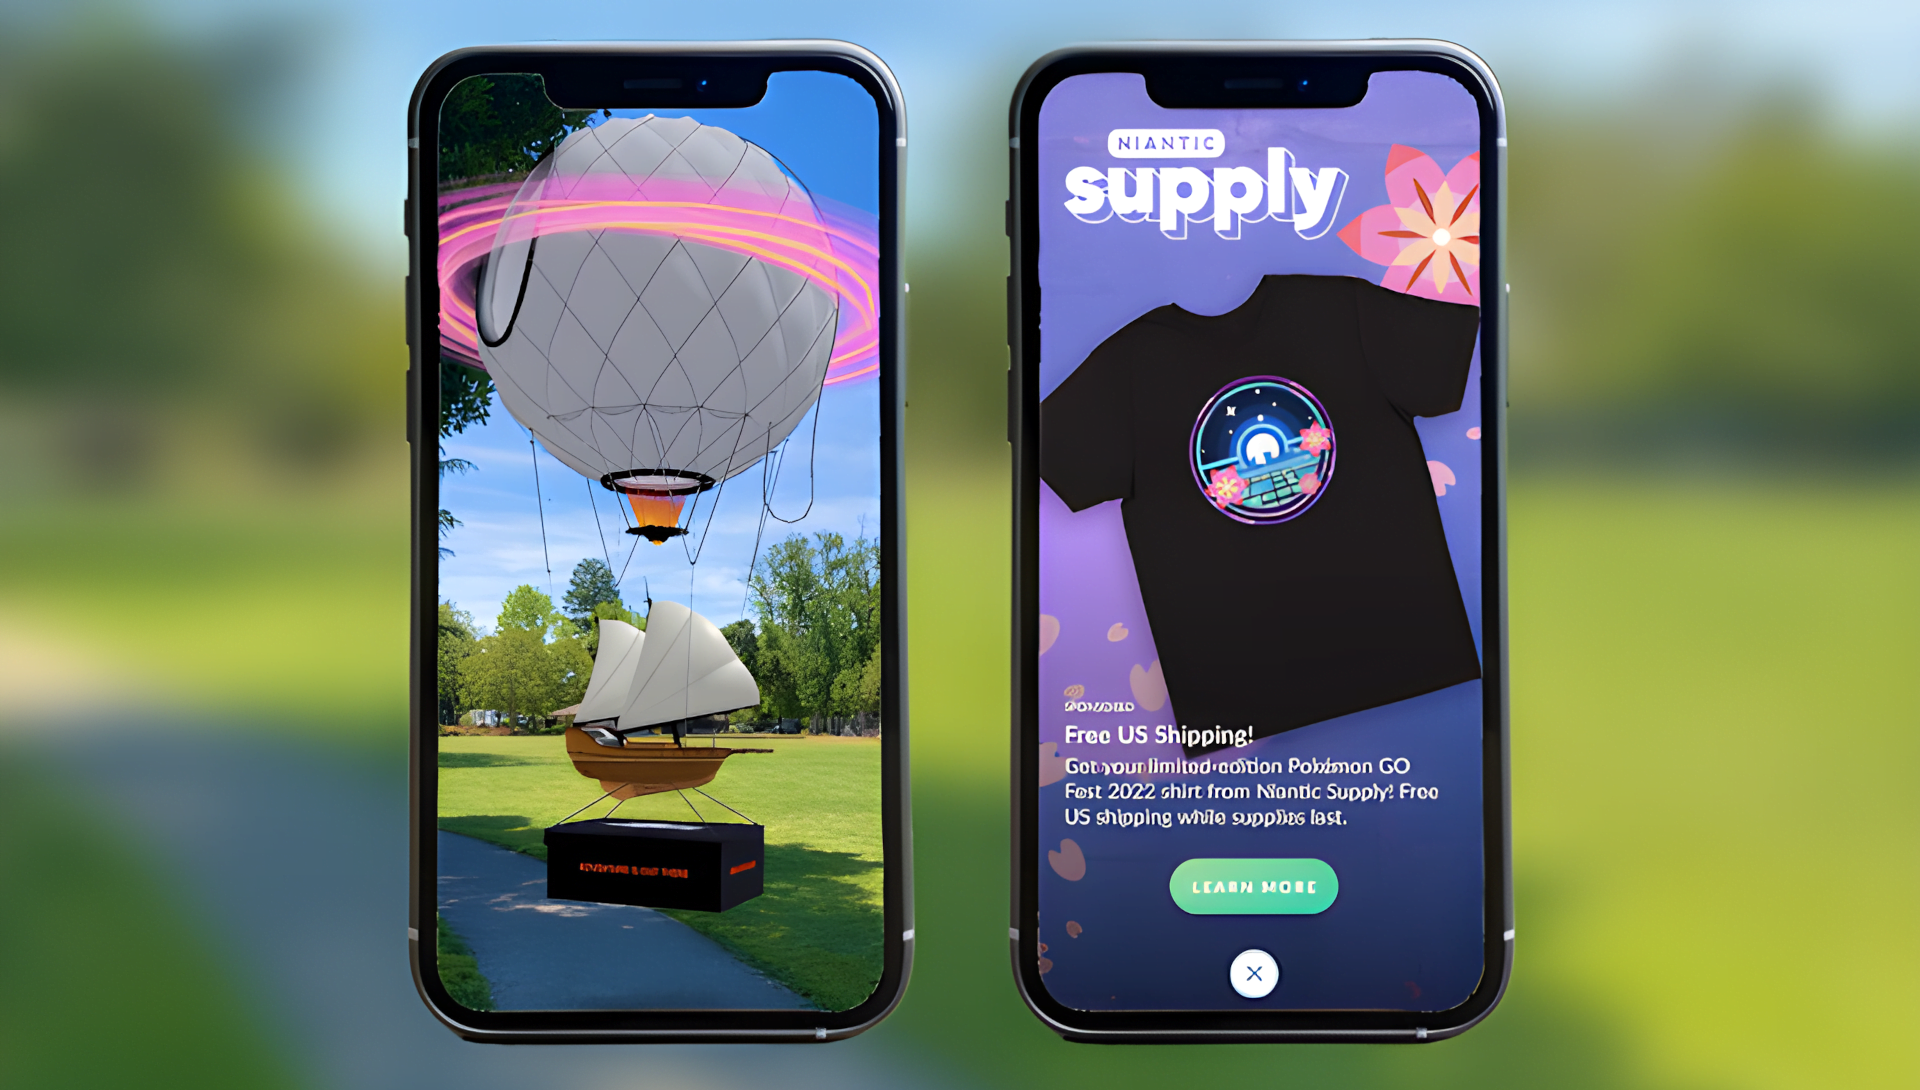 The Official Website of Niantic Supply